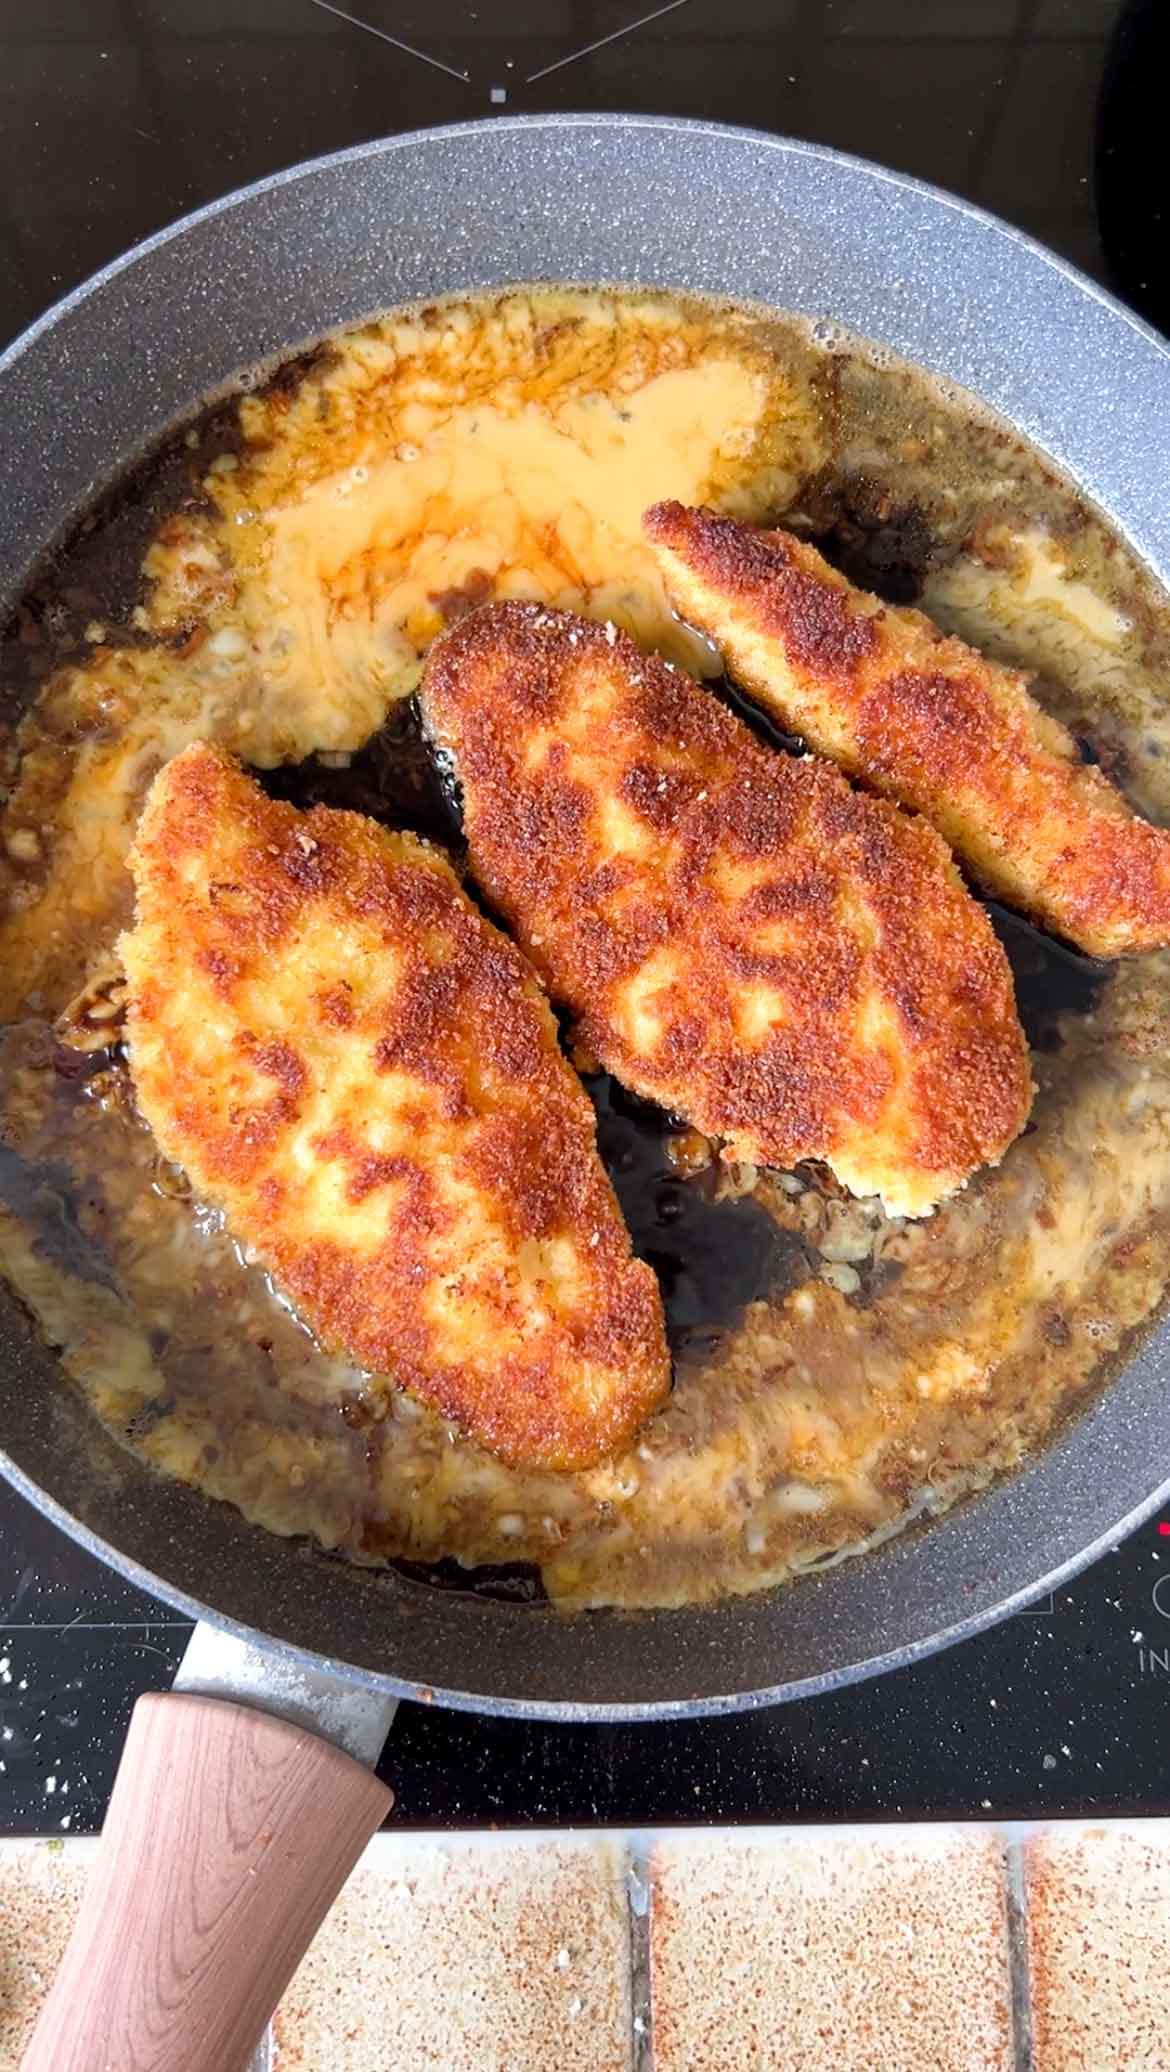 Egg mixture added to the pan of sauce and breaded chicken cutlets.